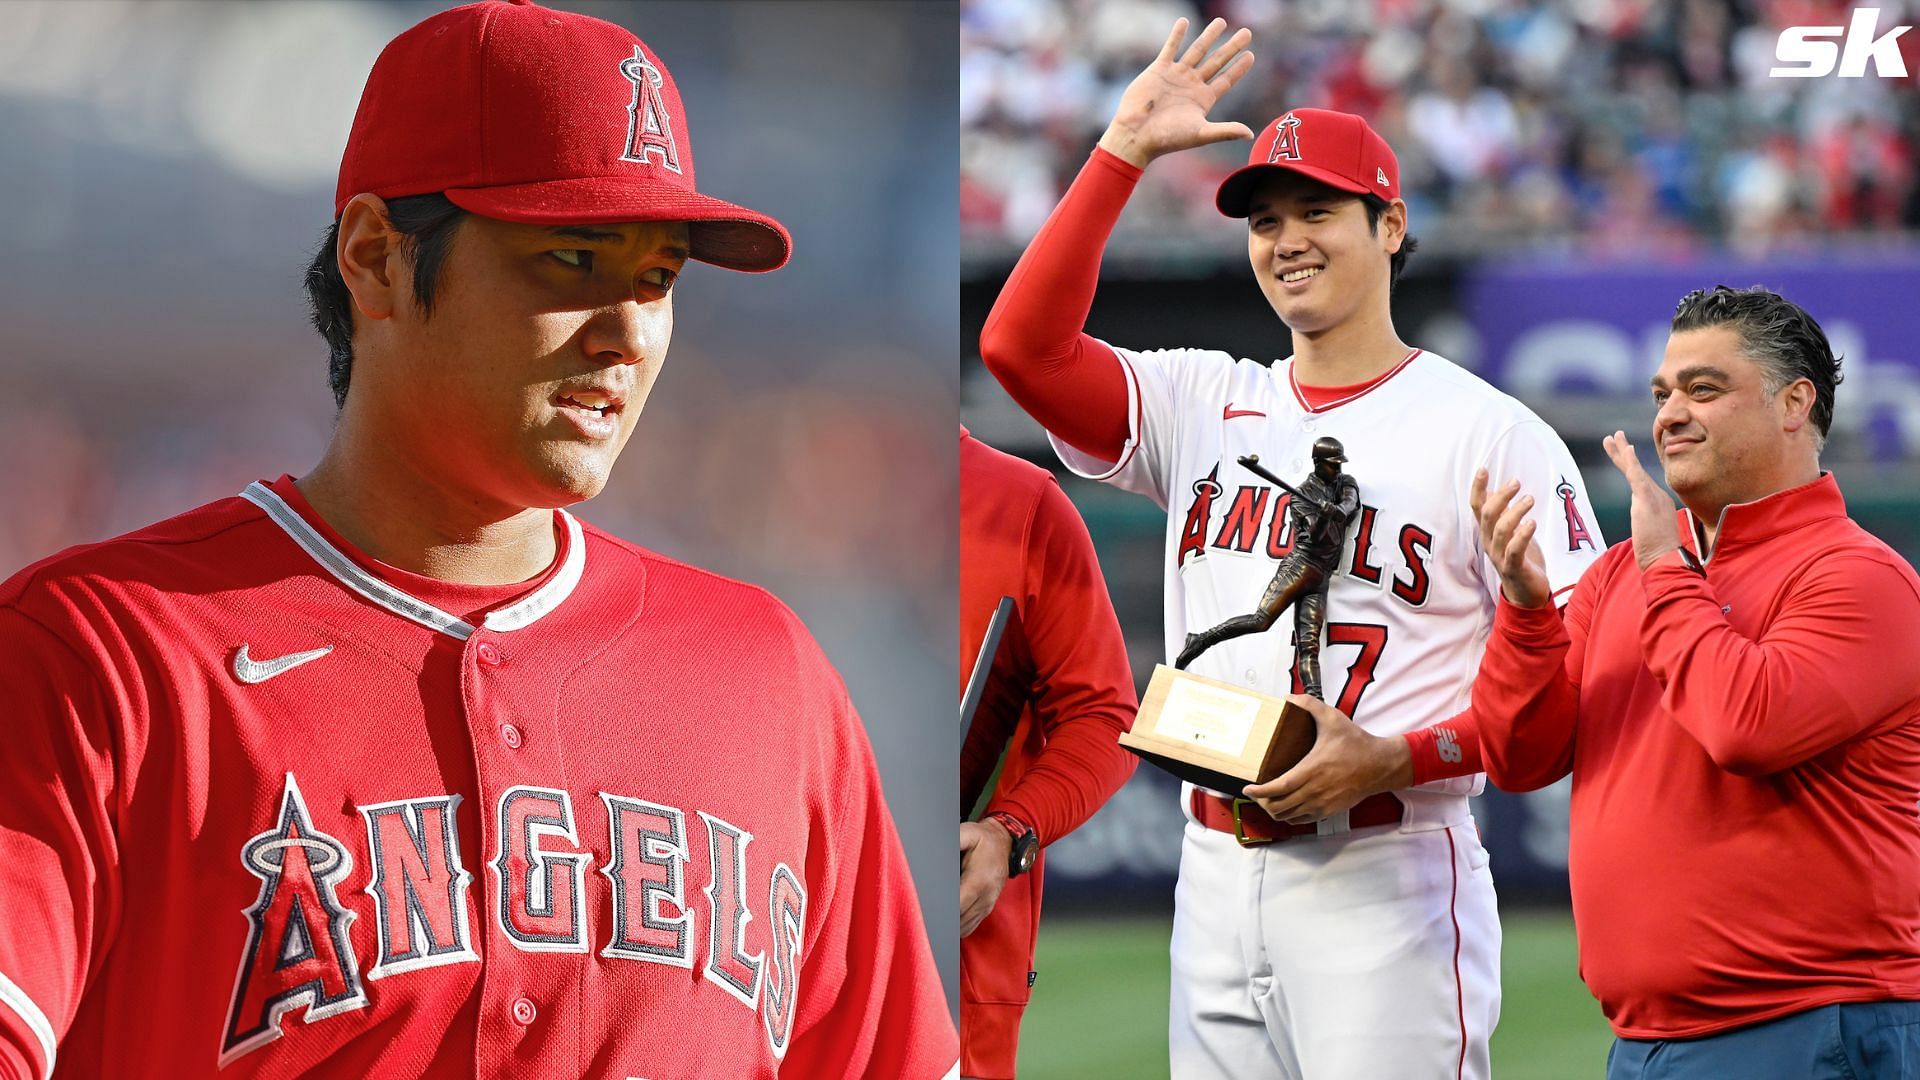 Shohei Ohtani and Perry Minasian of the Los Angeles Angels